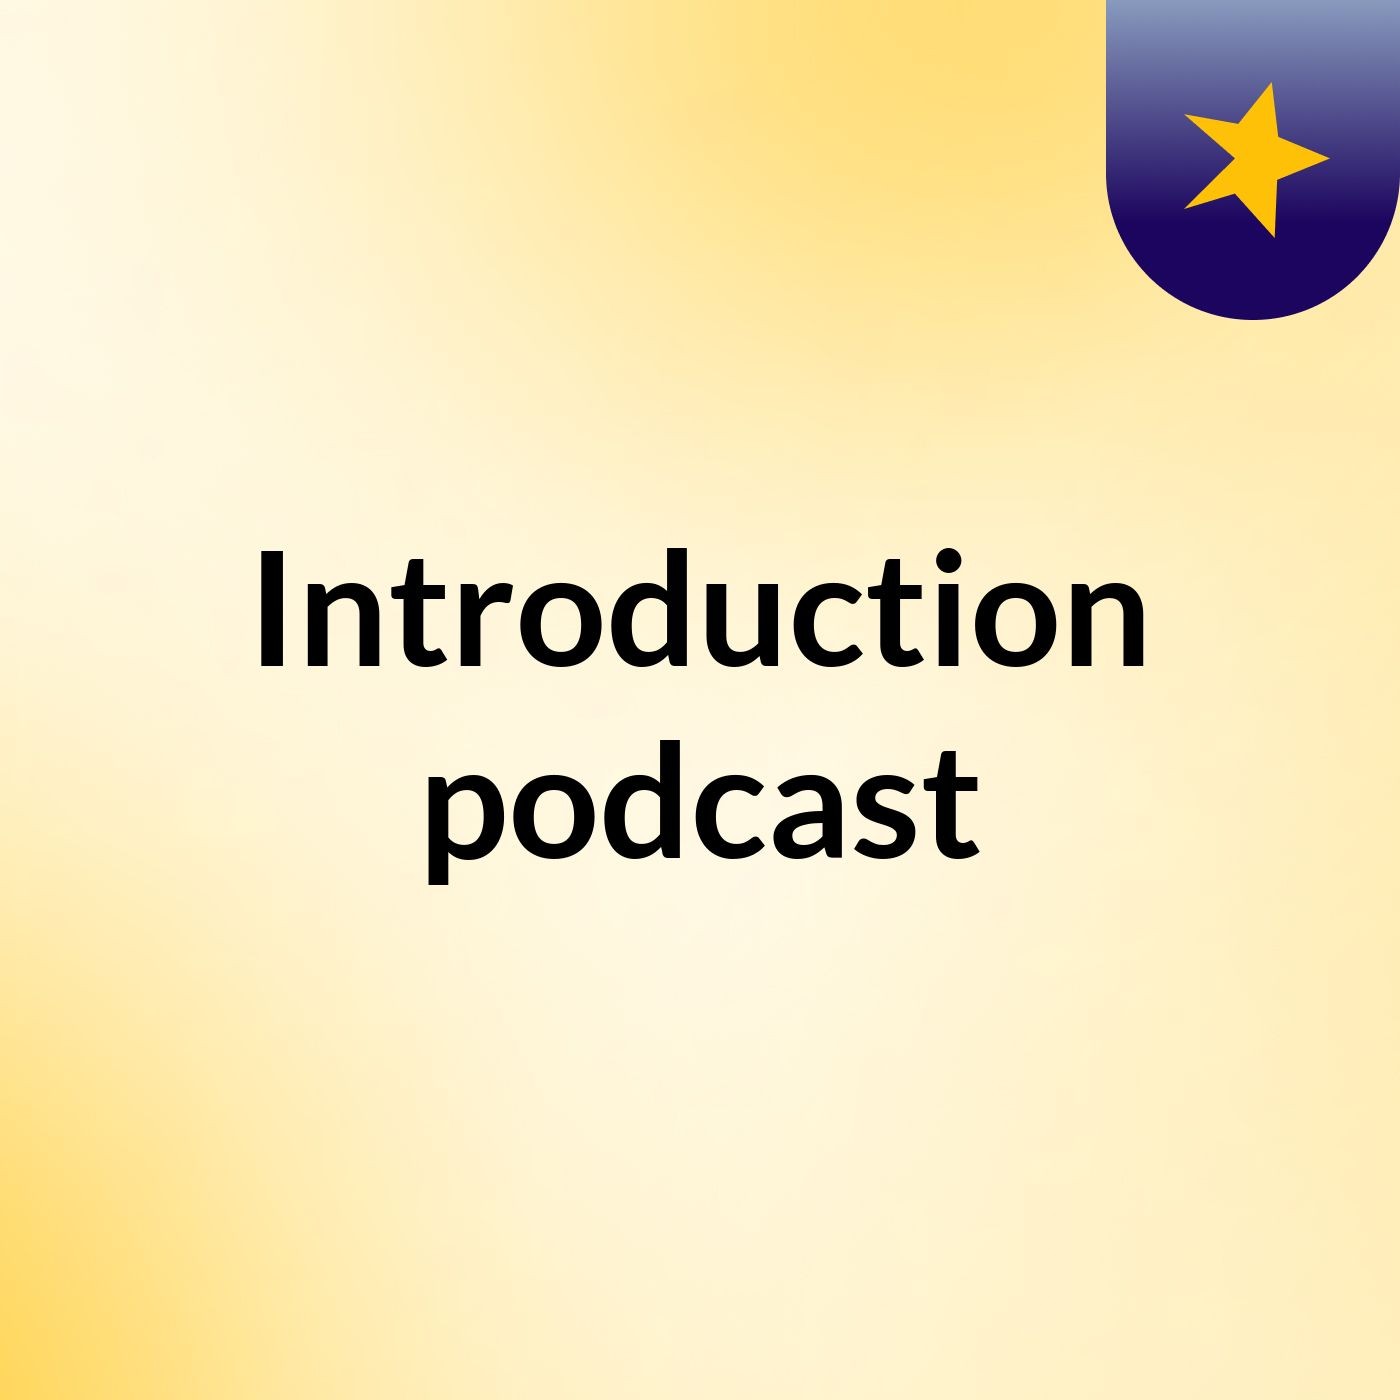 Introduction podcast